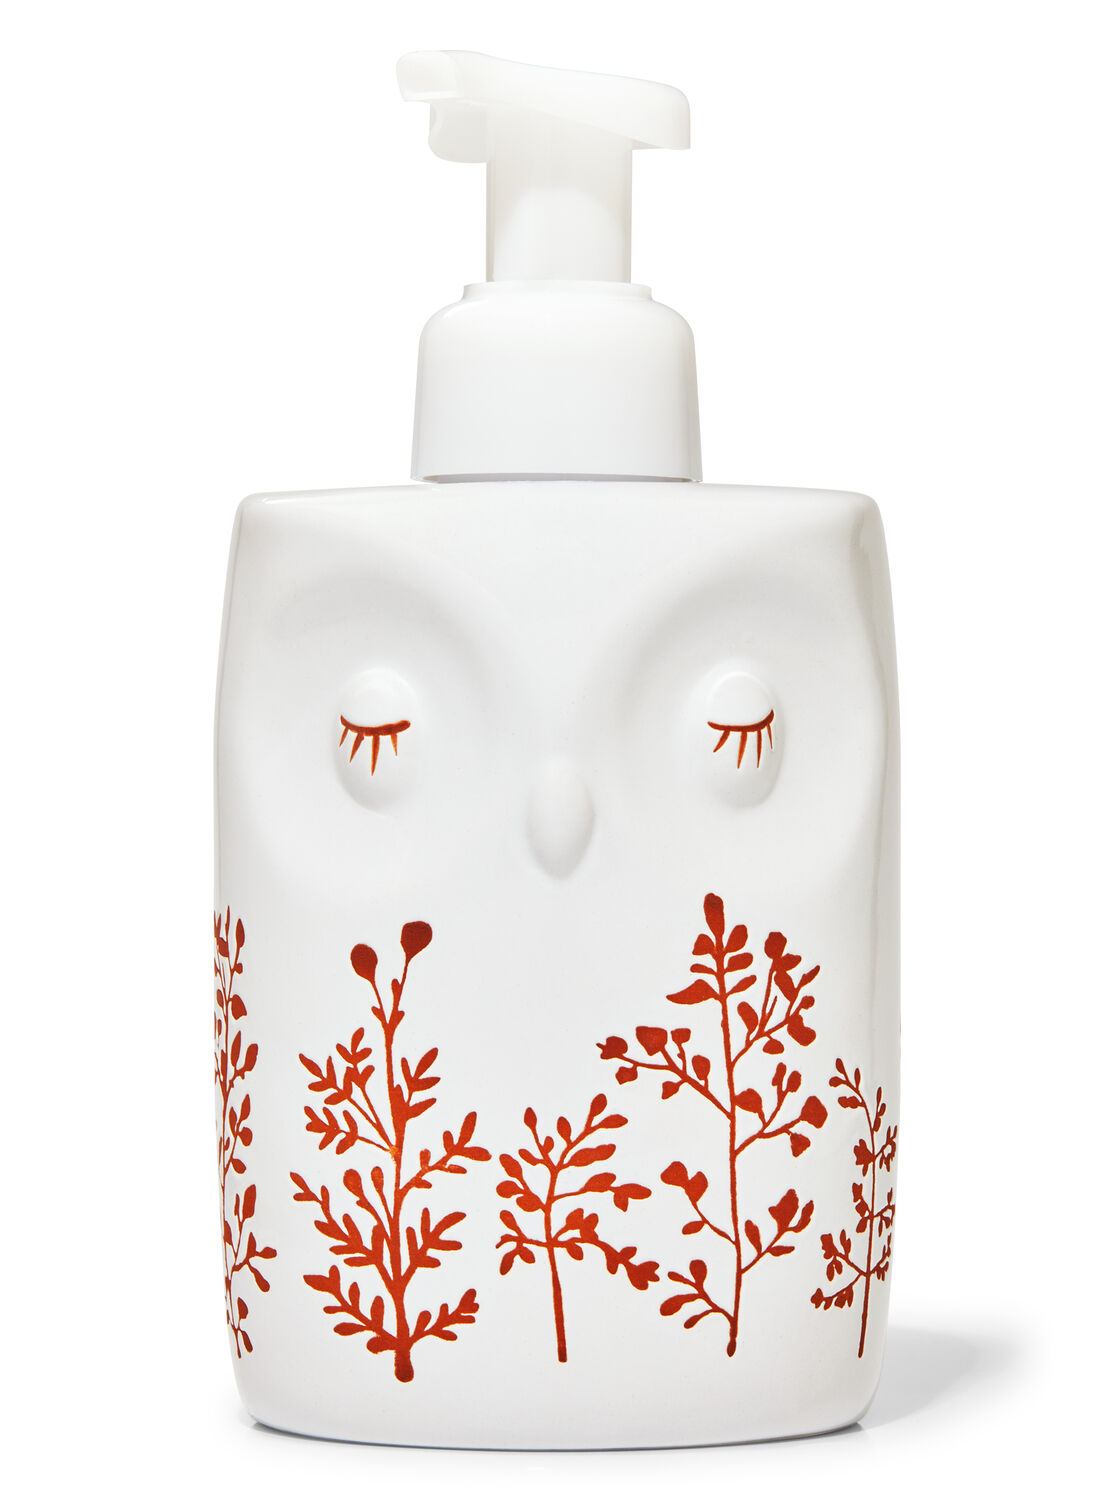 BATH BODY WORKS OWL HAND SOAP SLEEVE HOLDER FOAMING DEEP CLEANSING SMALL CANDLE 